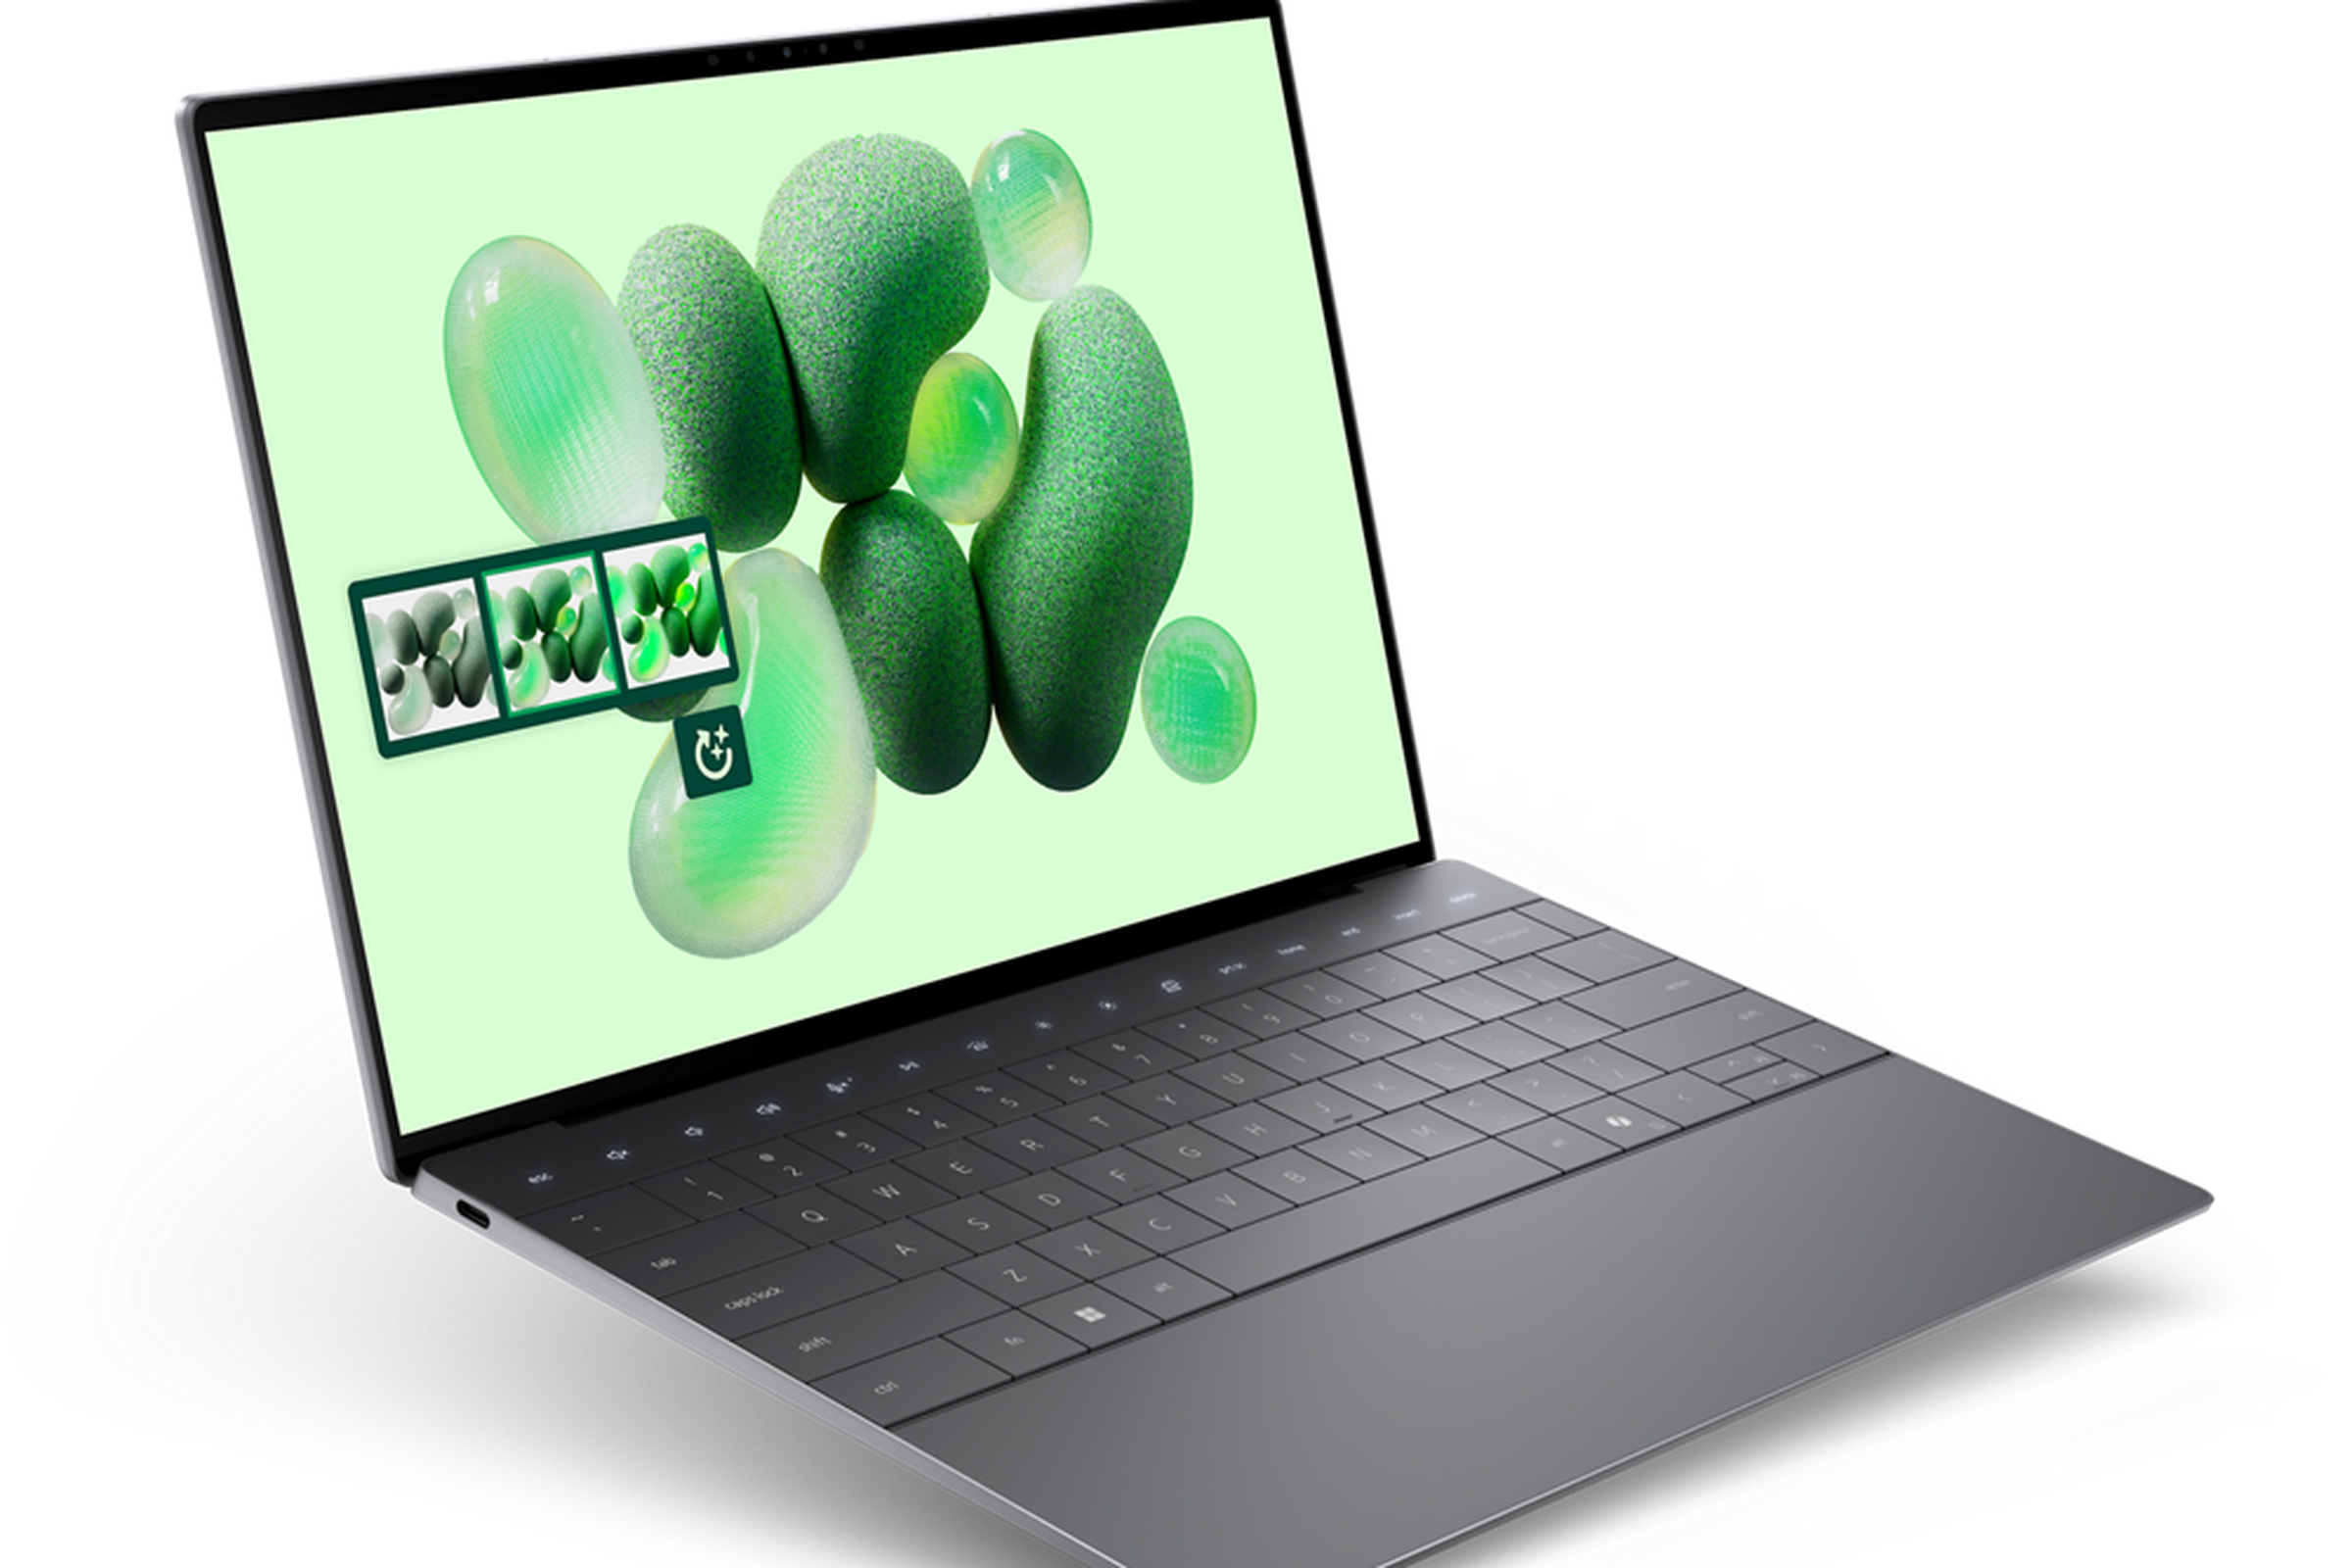 An open and powered-on laptop showing a bright green background with jellybean-like shapes